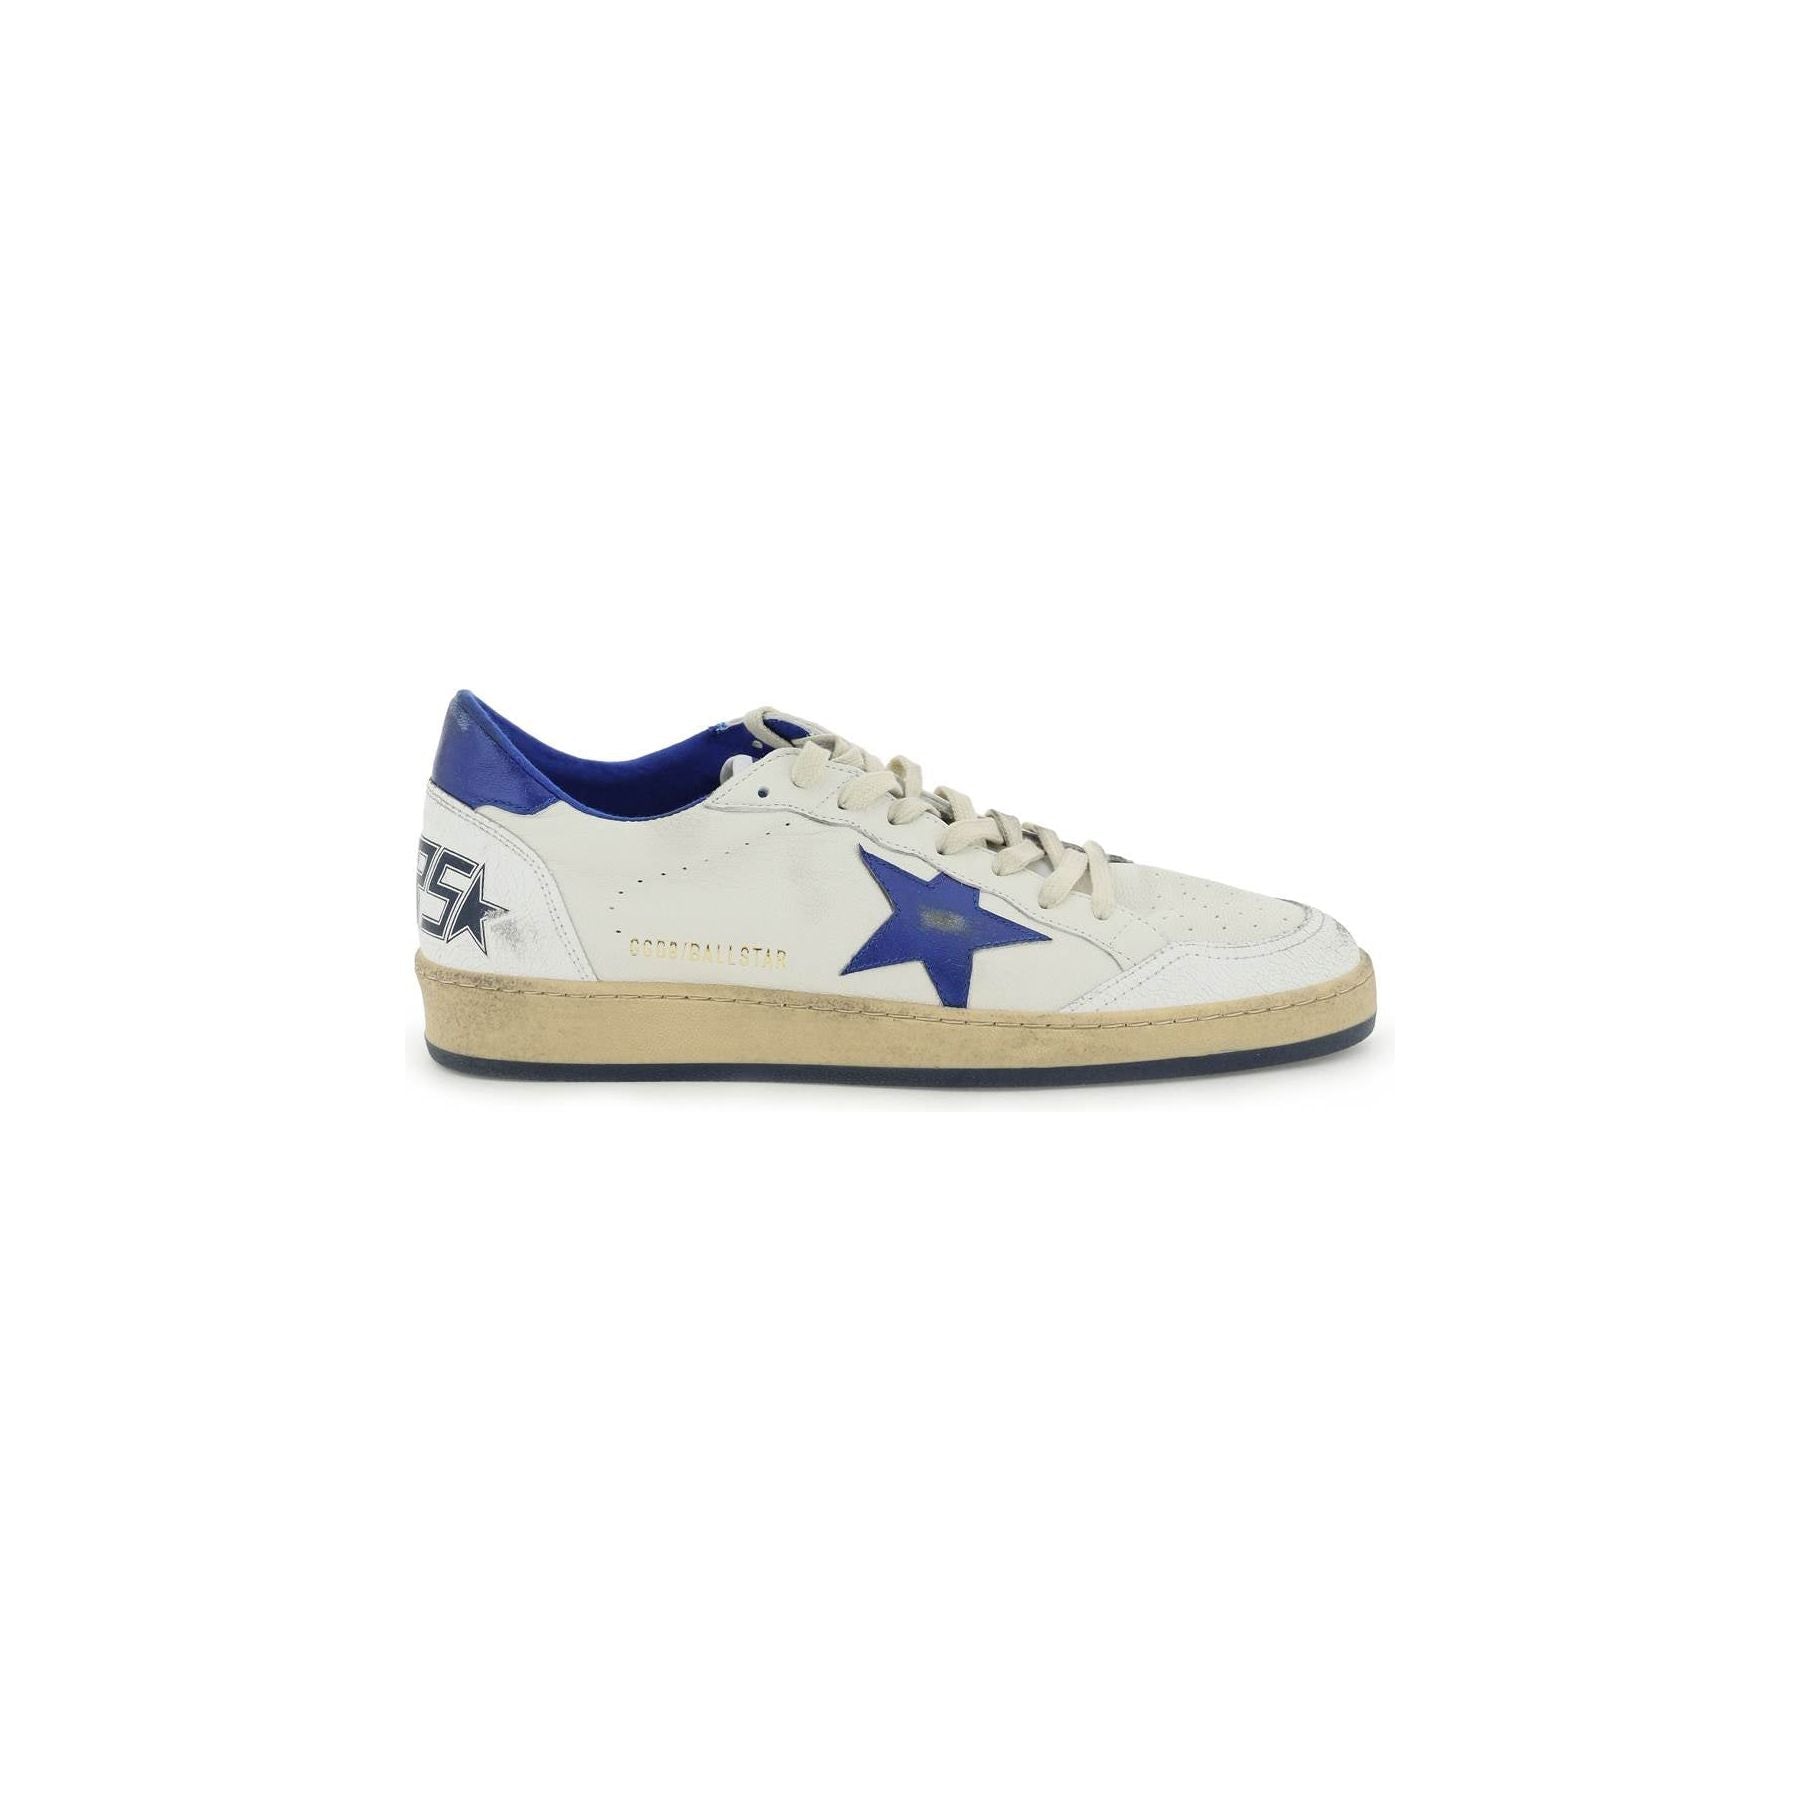 Ball Star Nappa Leather Sneakers